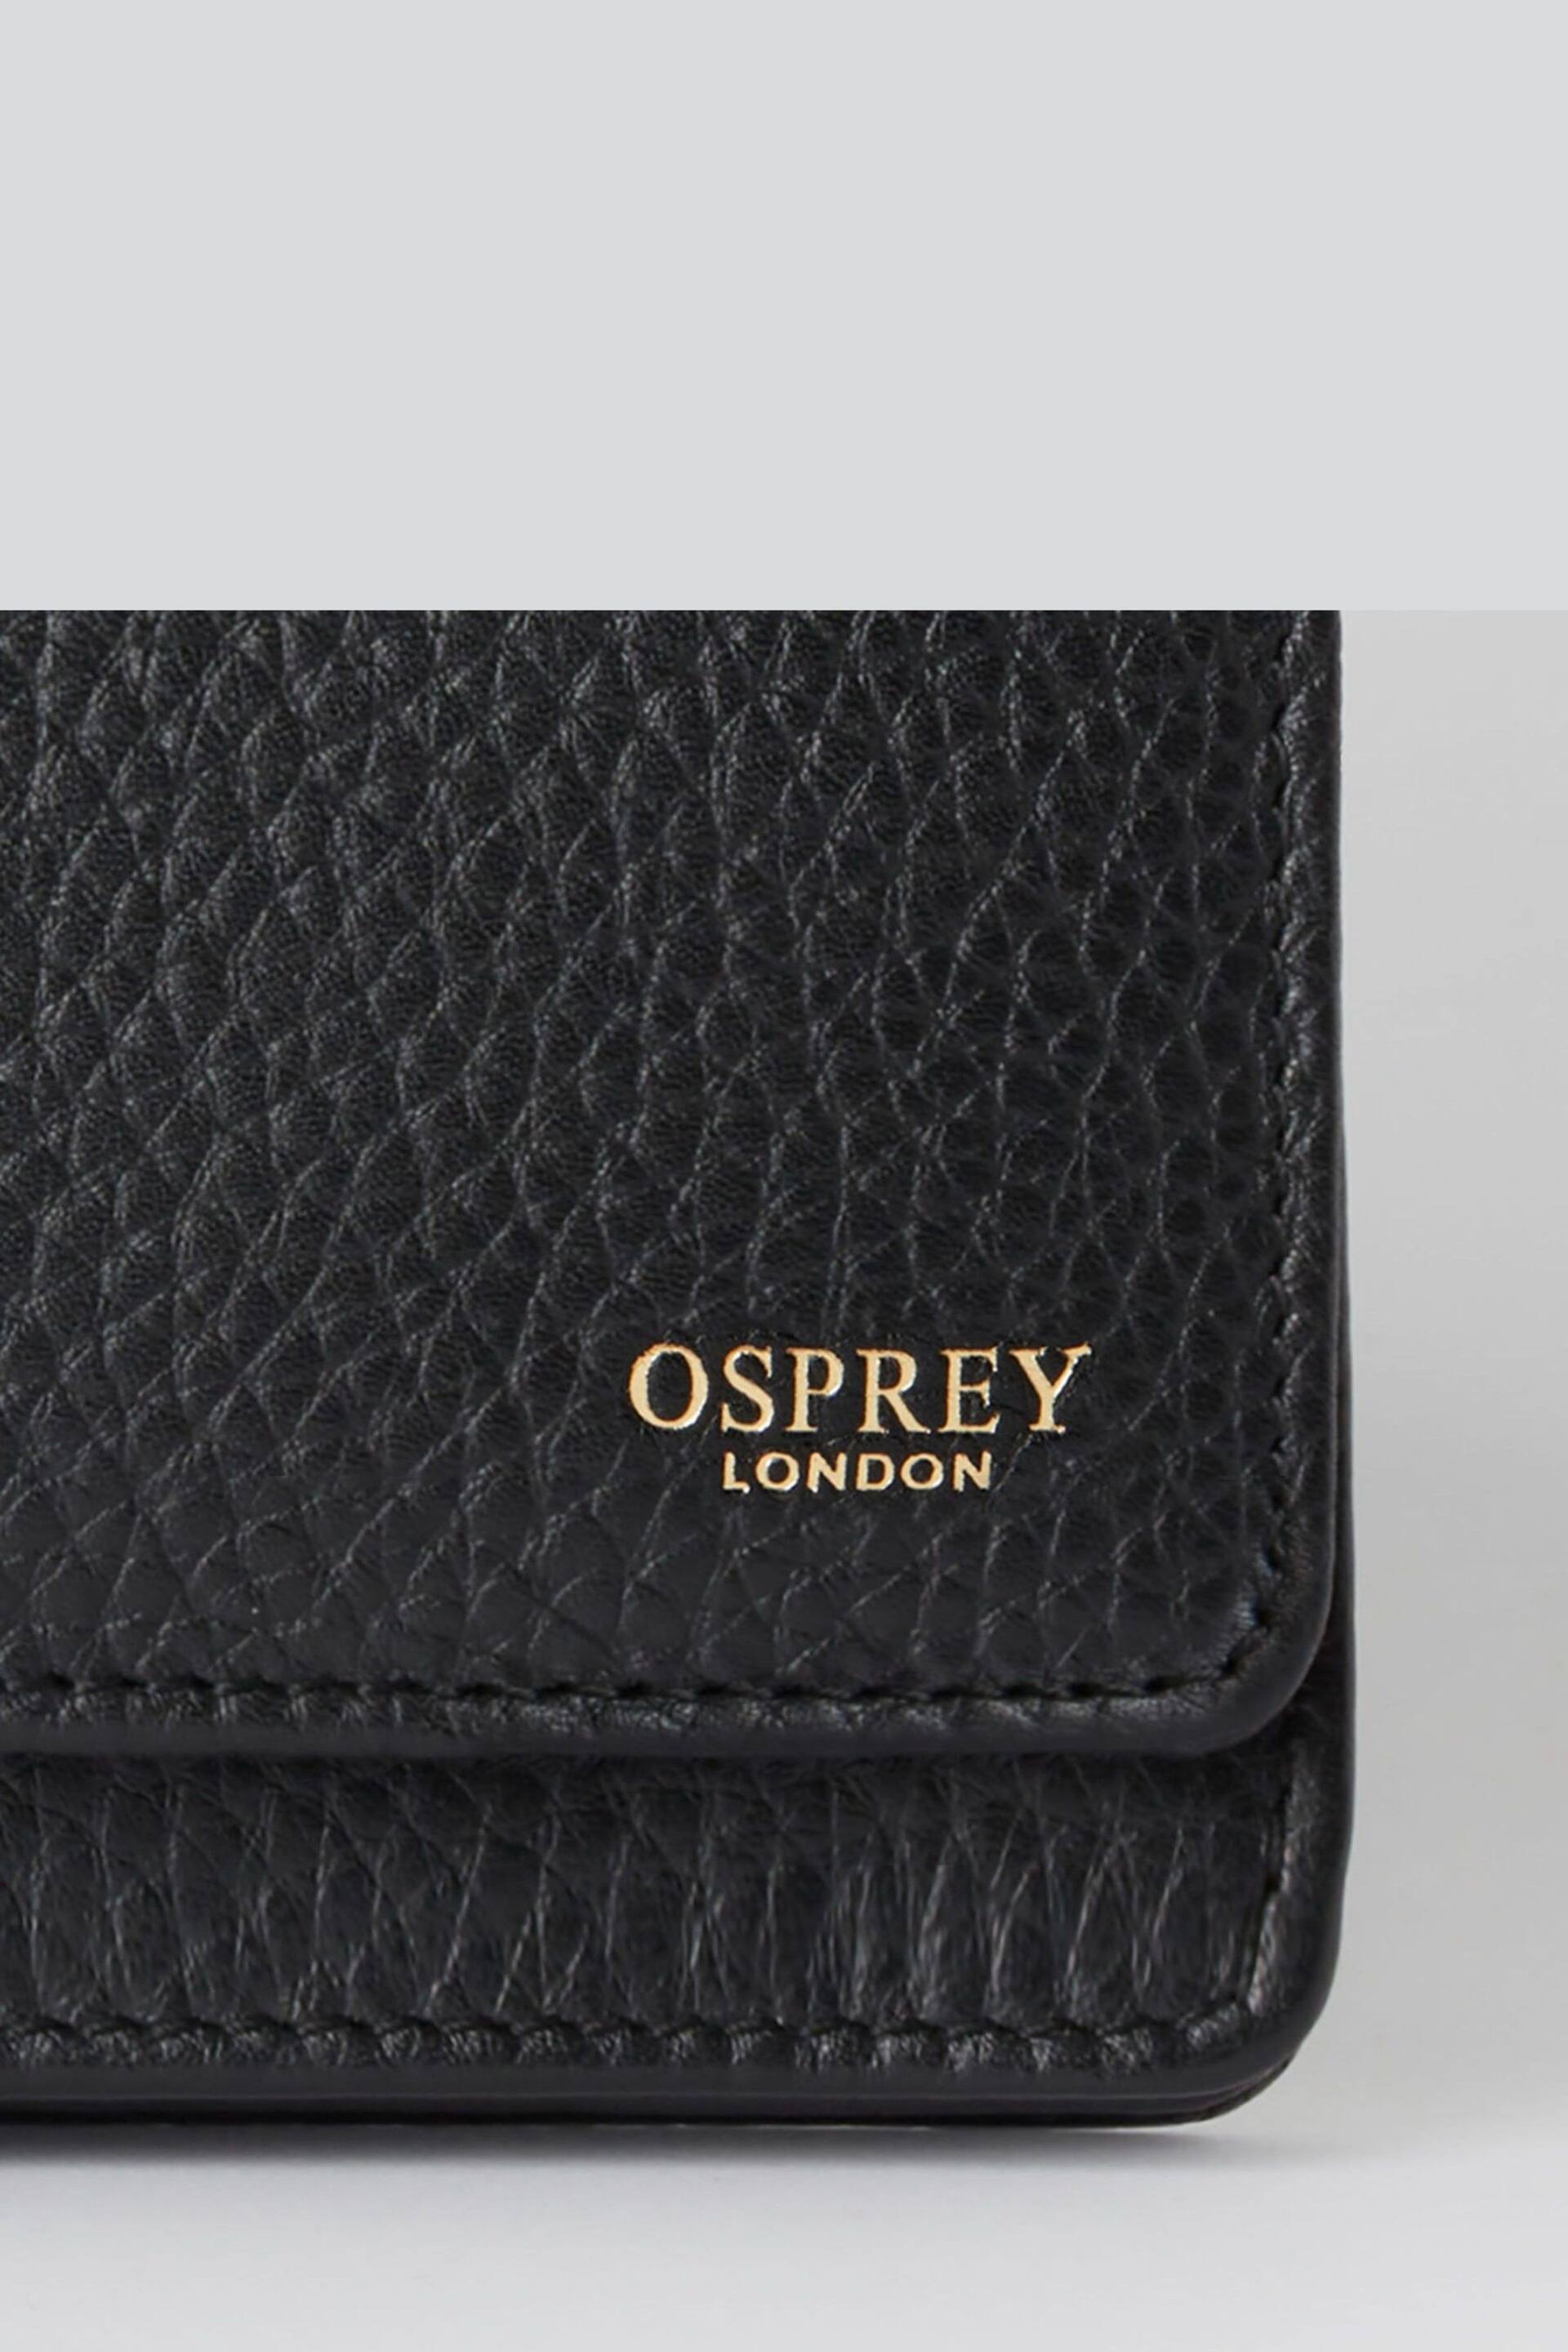 OSPREY LONDON The Harper Matinee Leather Purse - Image 5 of 5